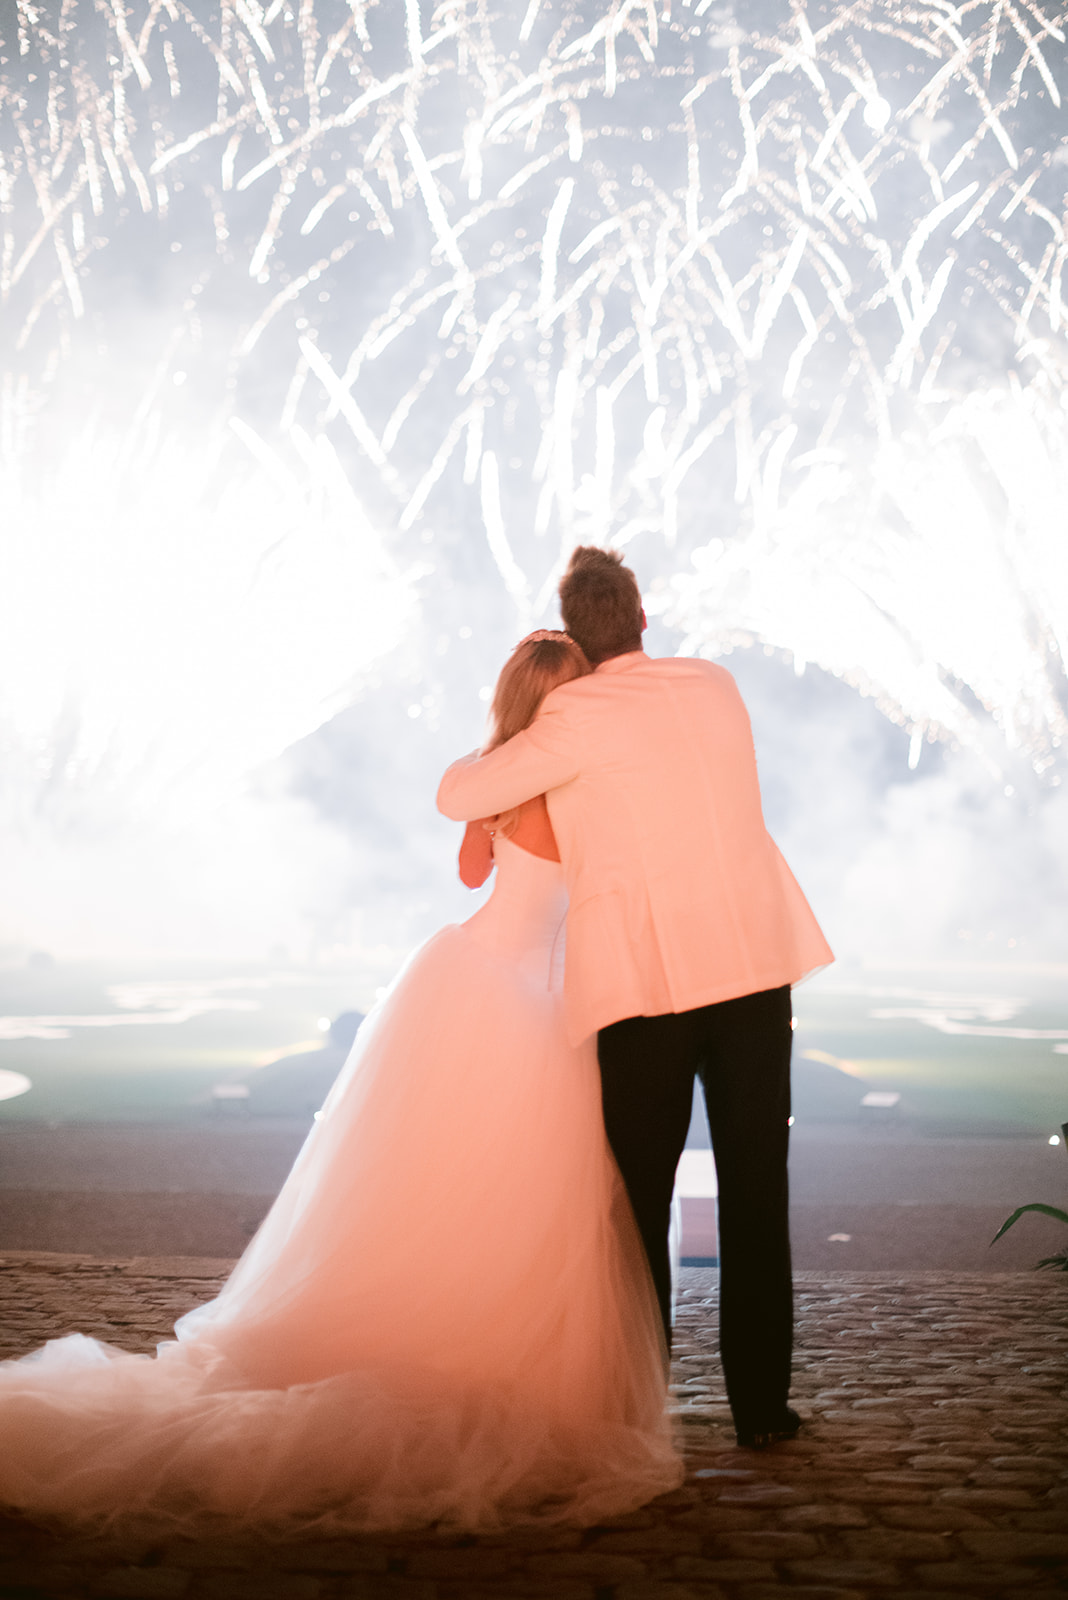 The bride and the groom looking at a firework for their wedding at chateau de vaux le vicomte 